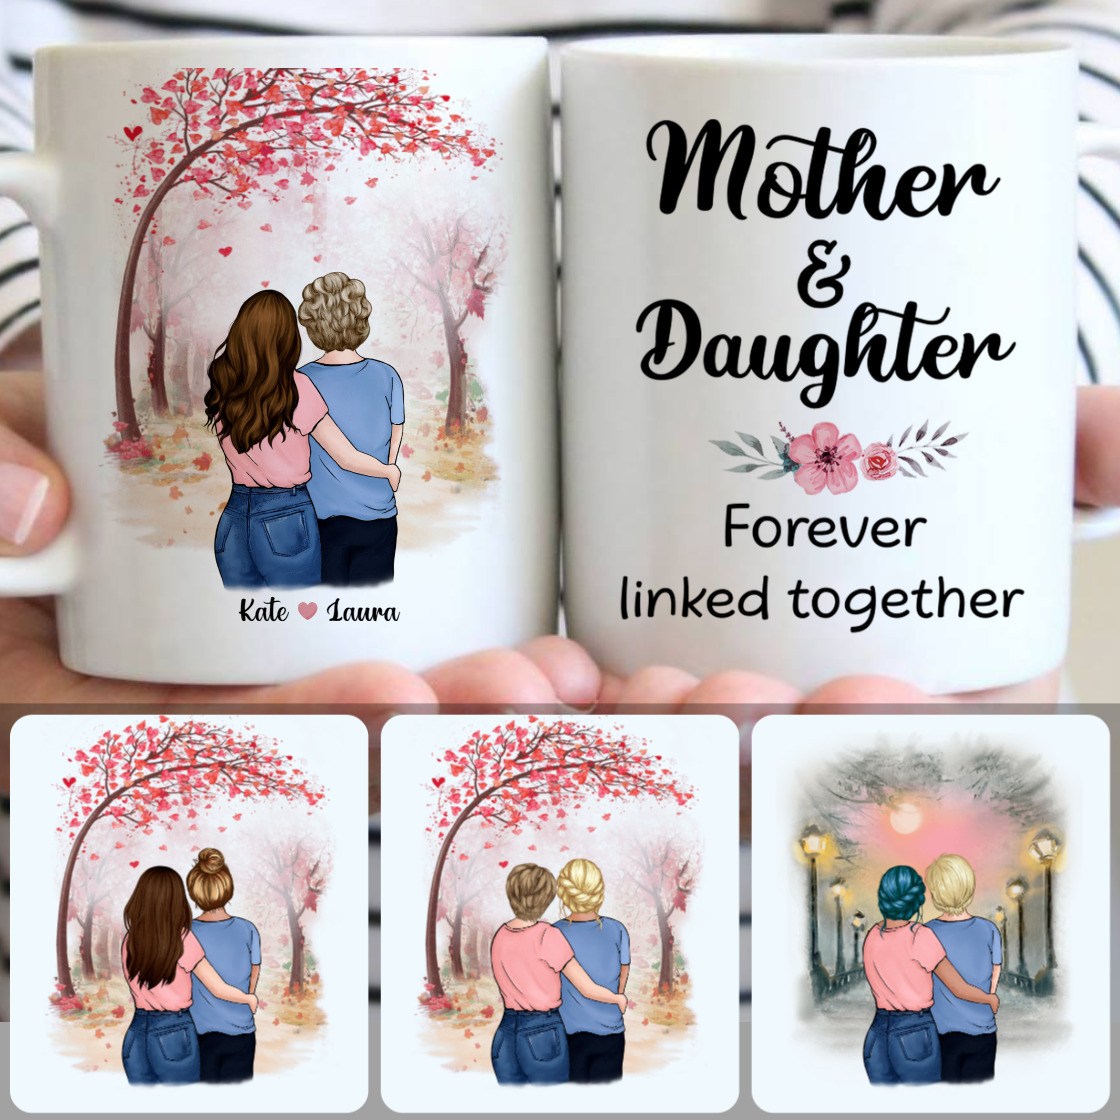 Personalized Mug, Best Gifts For Mom, Mother & Daughter Customized Coffee Mug With Names